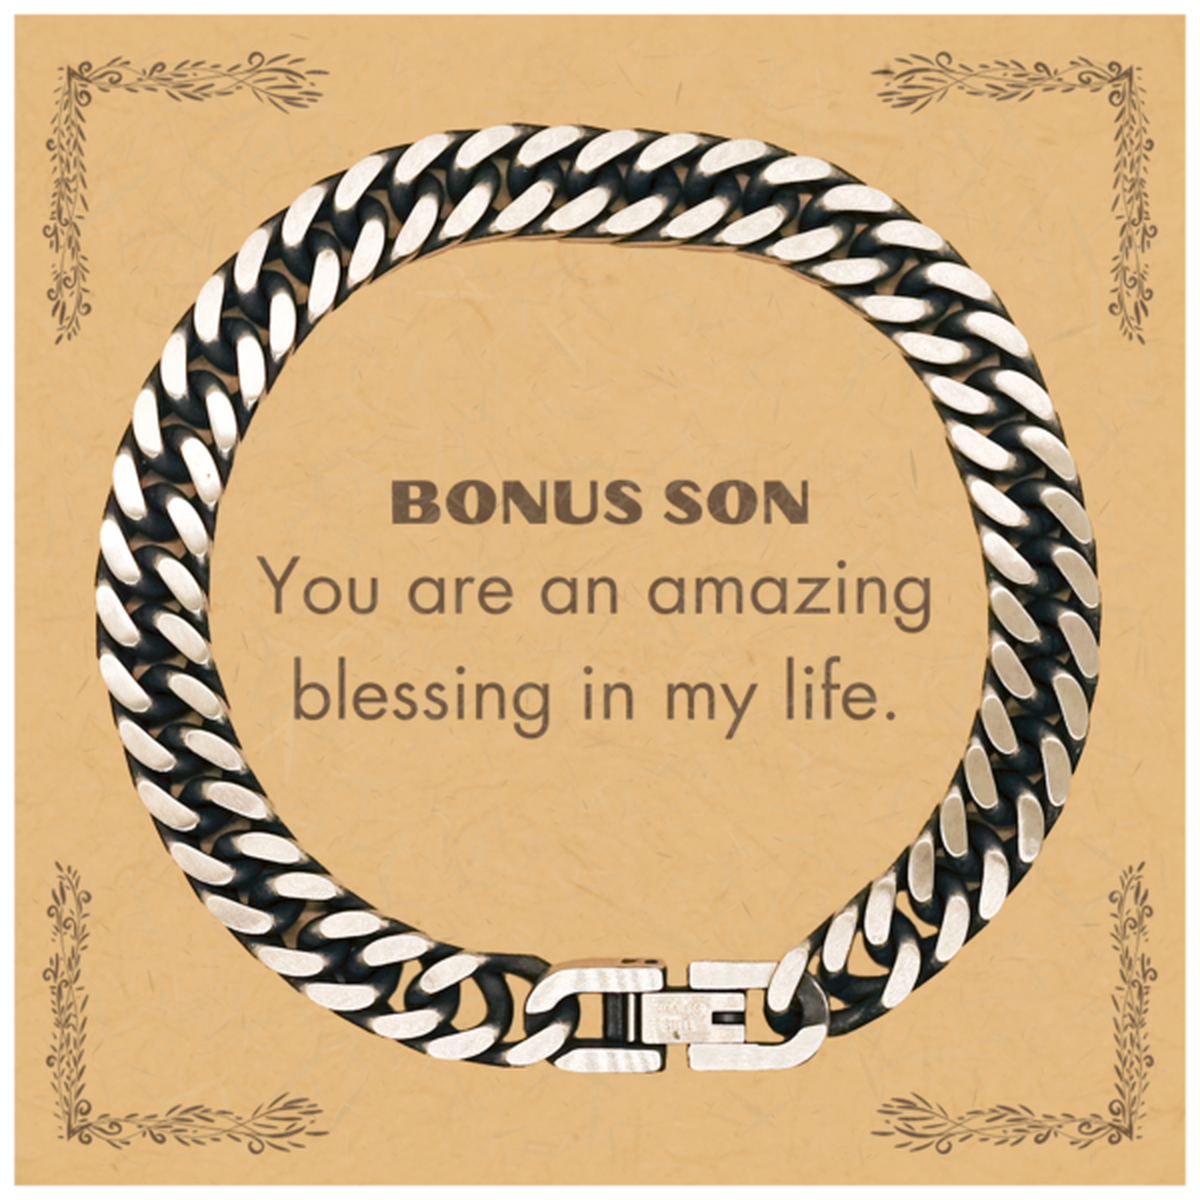 Bonus Son Cuban Link Chain Bracelet, You are an amazing blessing in my life, Thank You Gifts For Bonus Son, Inspirational Birthday Christmas Unique Gifts For Bonus Son